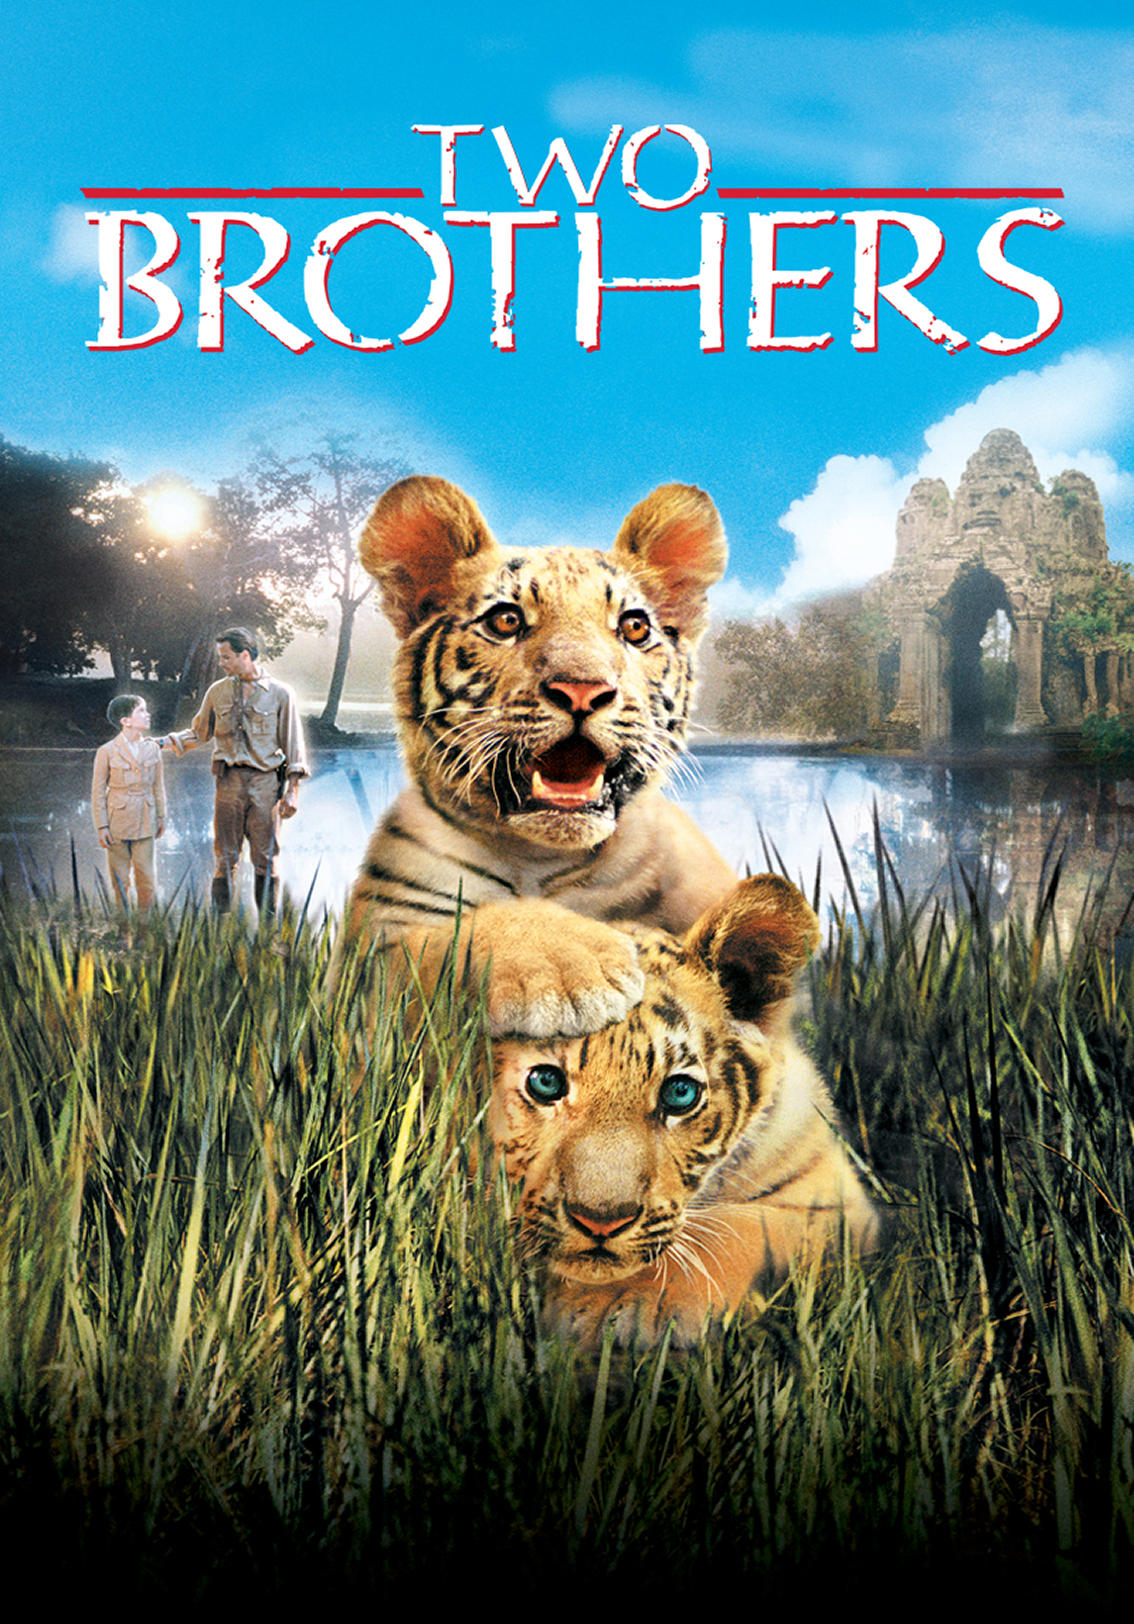 a tale of two brothers game download